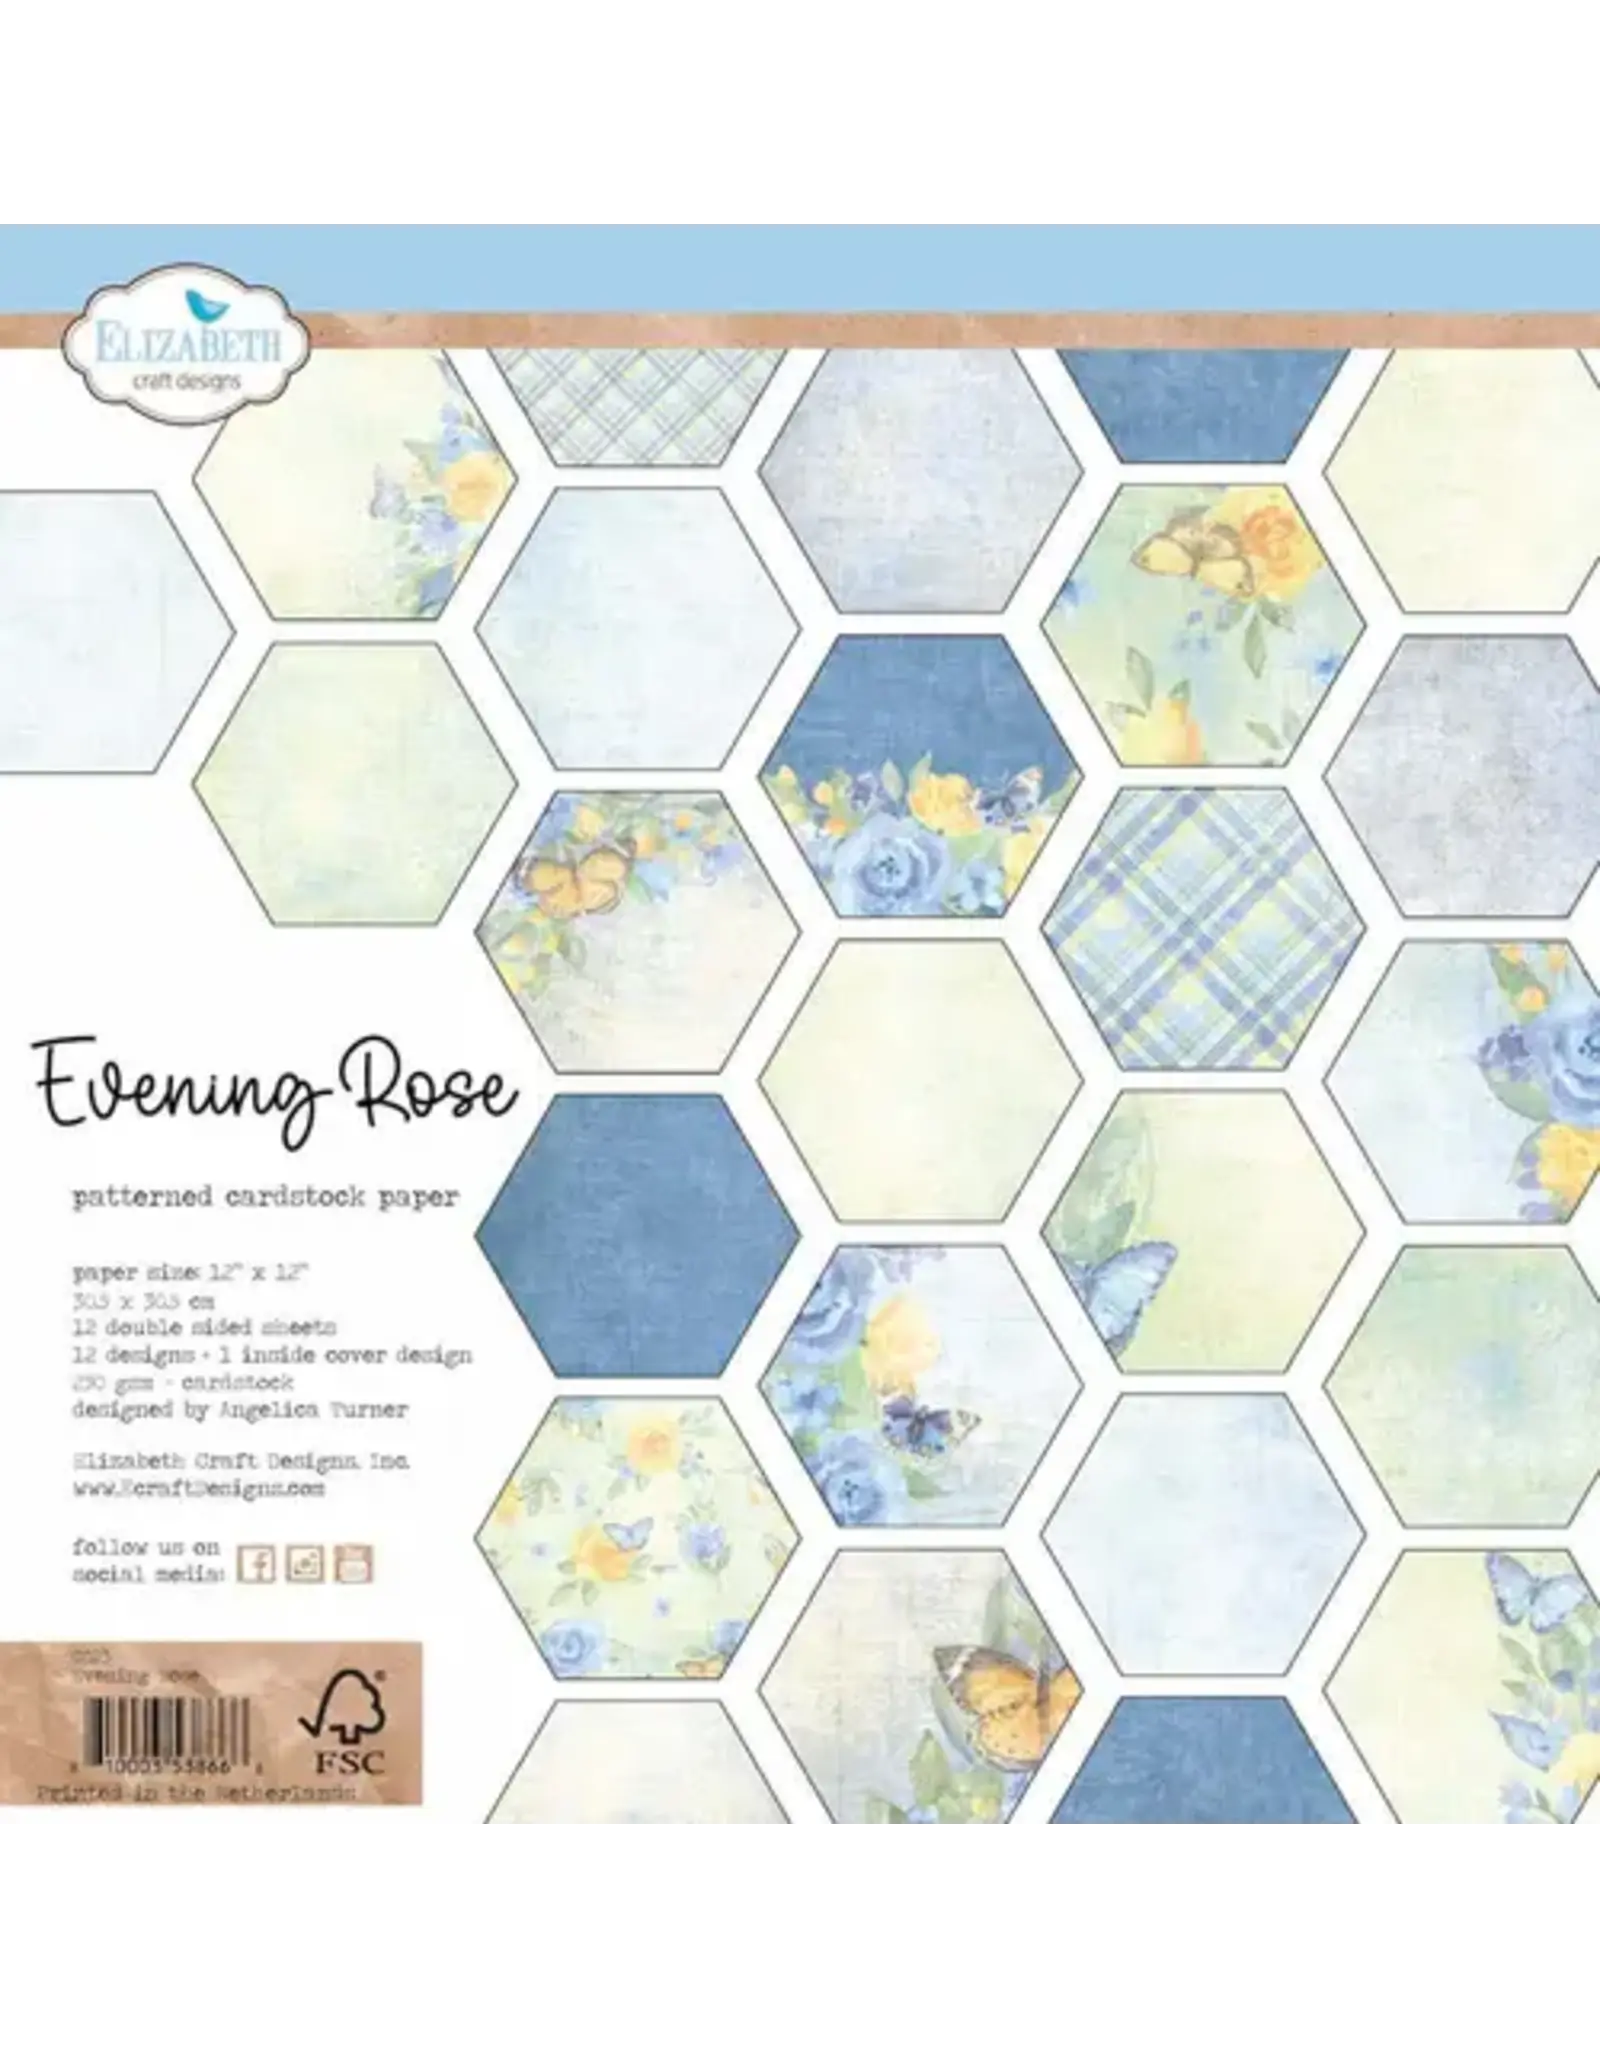 ELIZABETH CRAFT DESIGNS ELIZABETH CRAFT DESIGNS EVENING ROSE 12X12 PAPER PACK